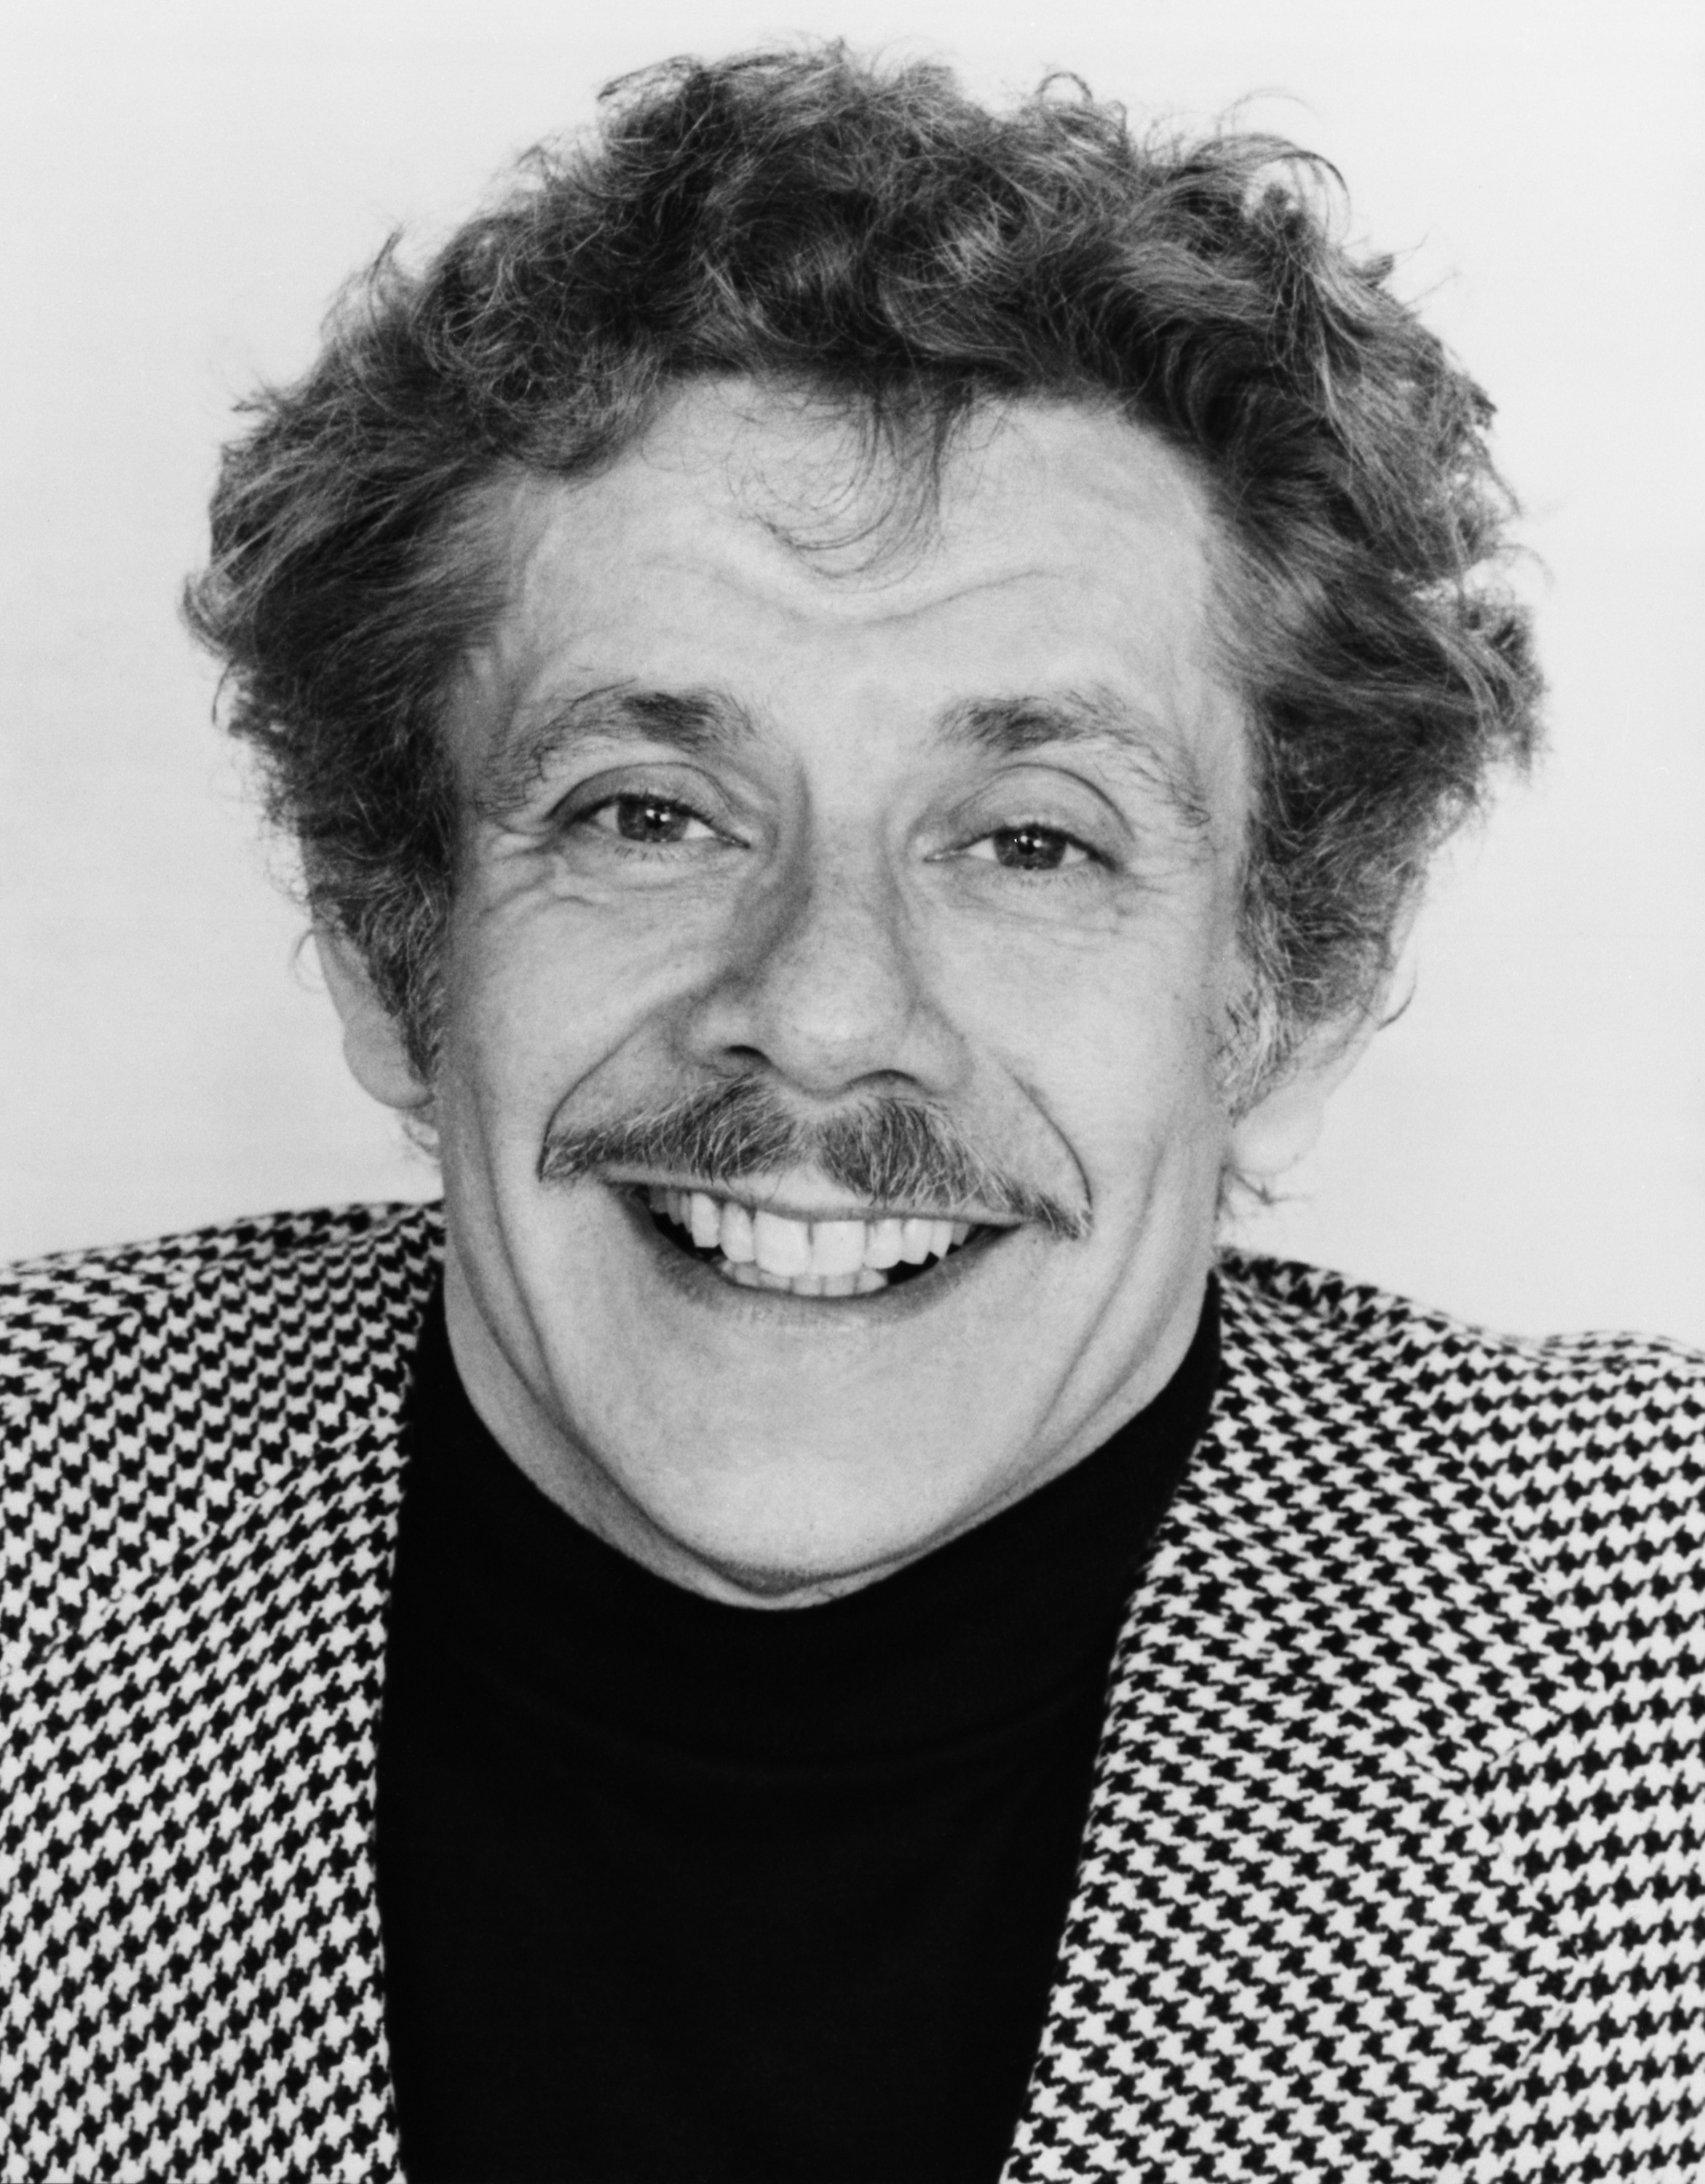 Jerry Stiller as Frank Costanza from "Seinfeld." | Source: Getty Images